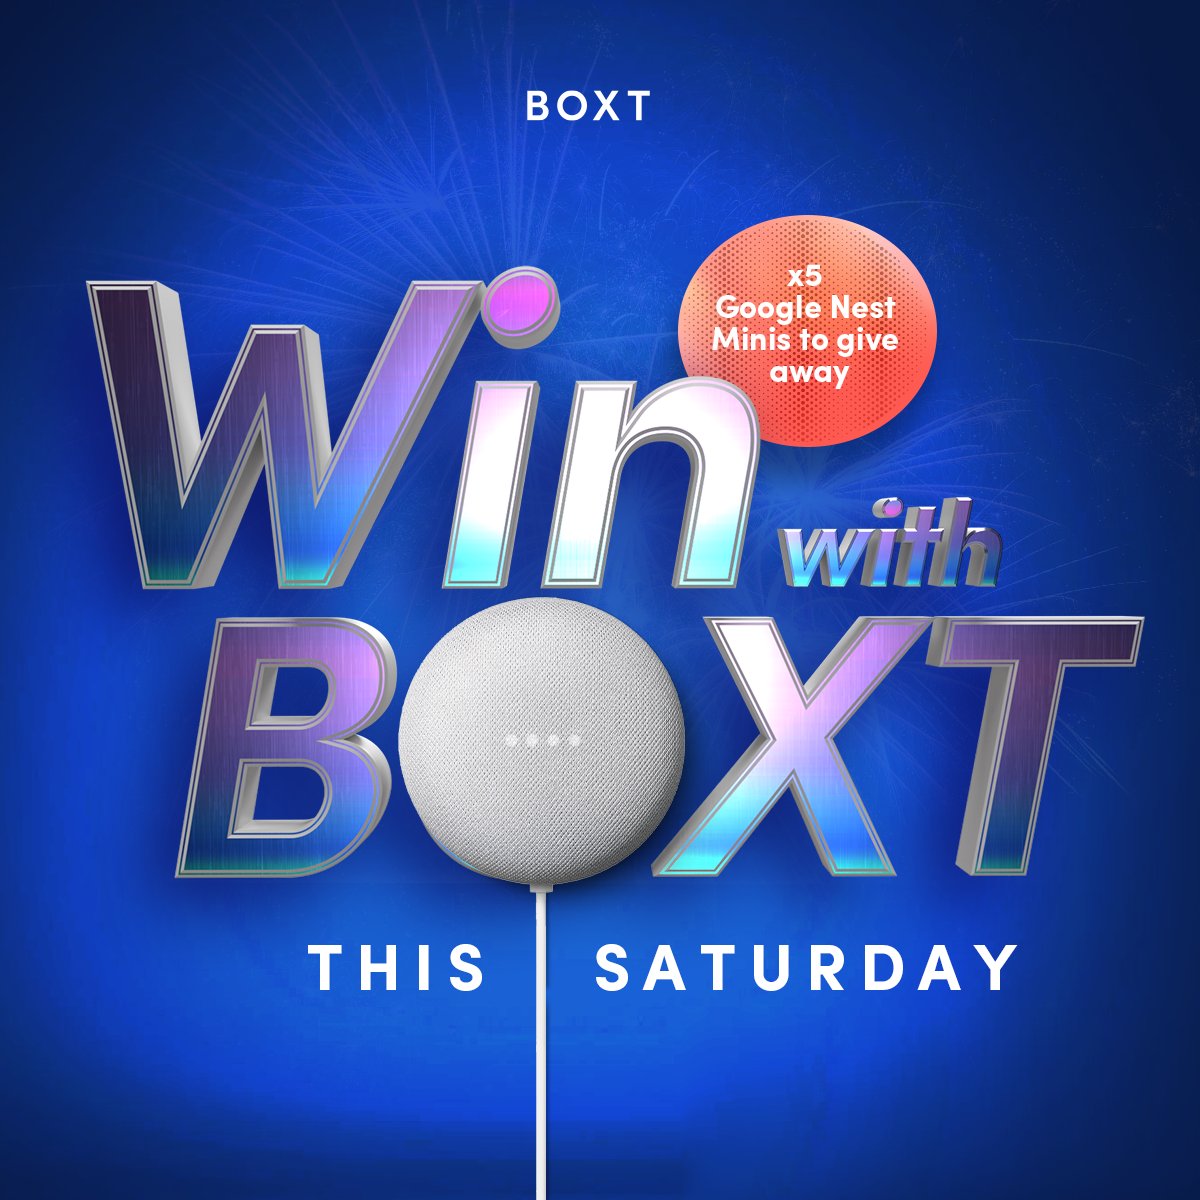 We're back tonight with #antanddec on ITV's 20th season of Saturday Night Takeaway from 7pm. Are you ready for another memorable night? Tag us with @weareboxt when you see us on Win The Ads to be in with a chance of winning one of five Google Nest Minis.